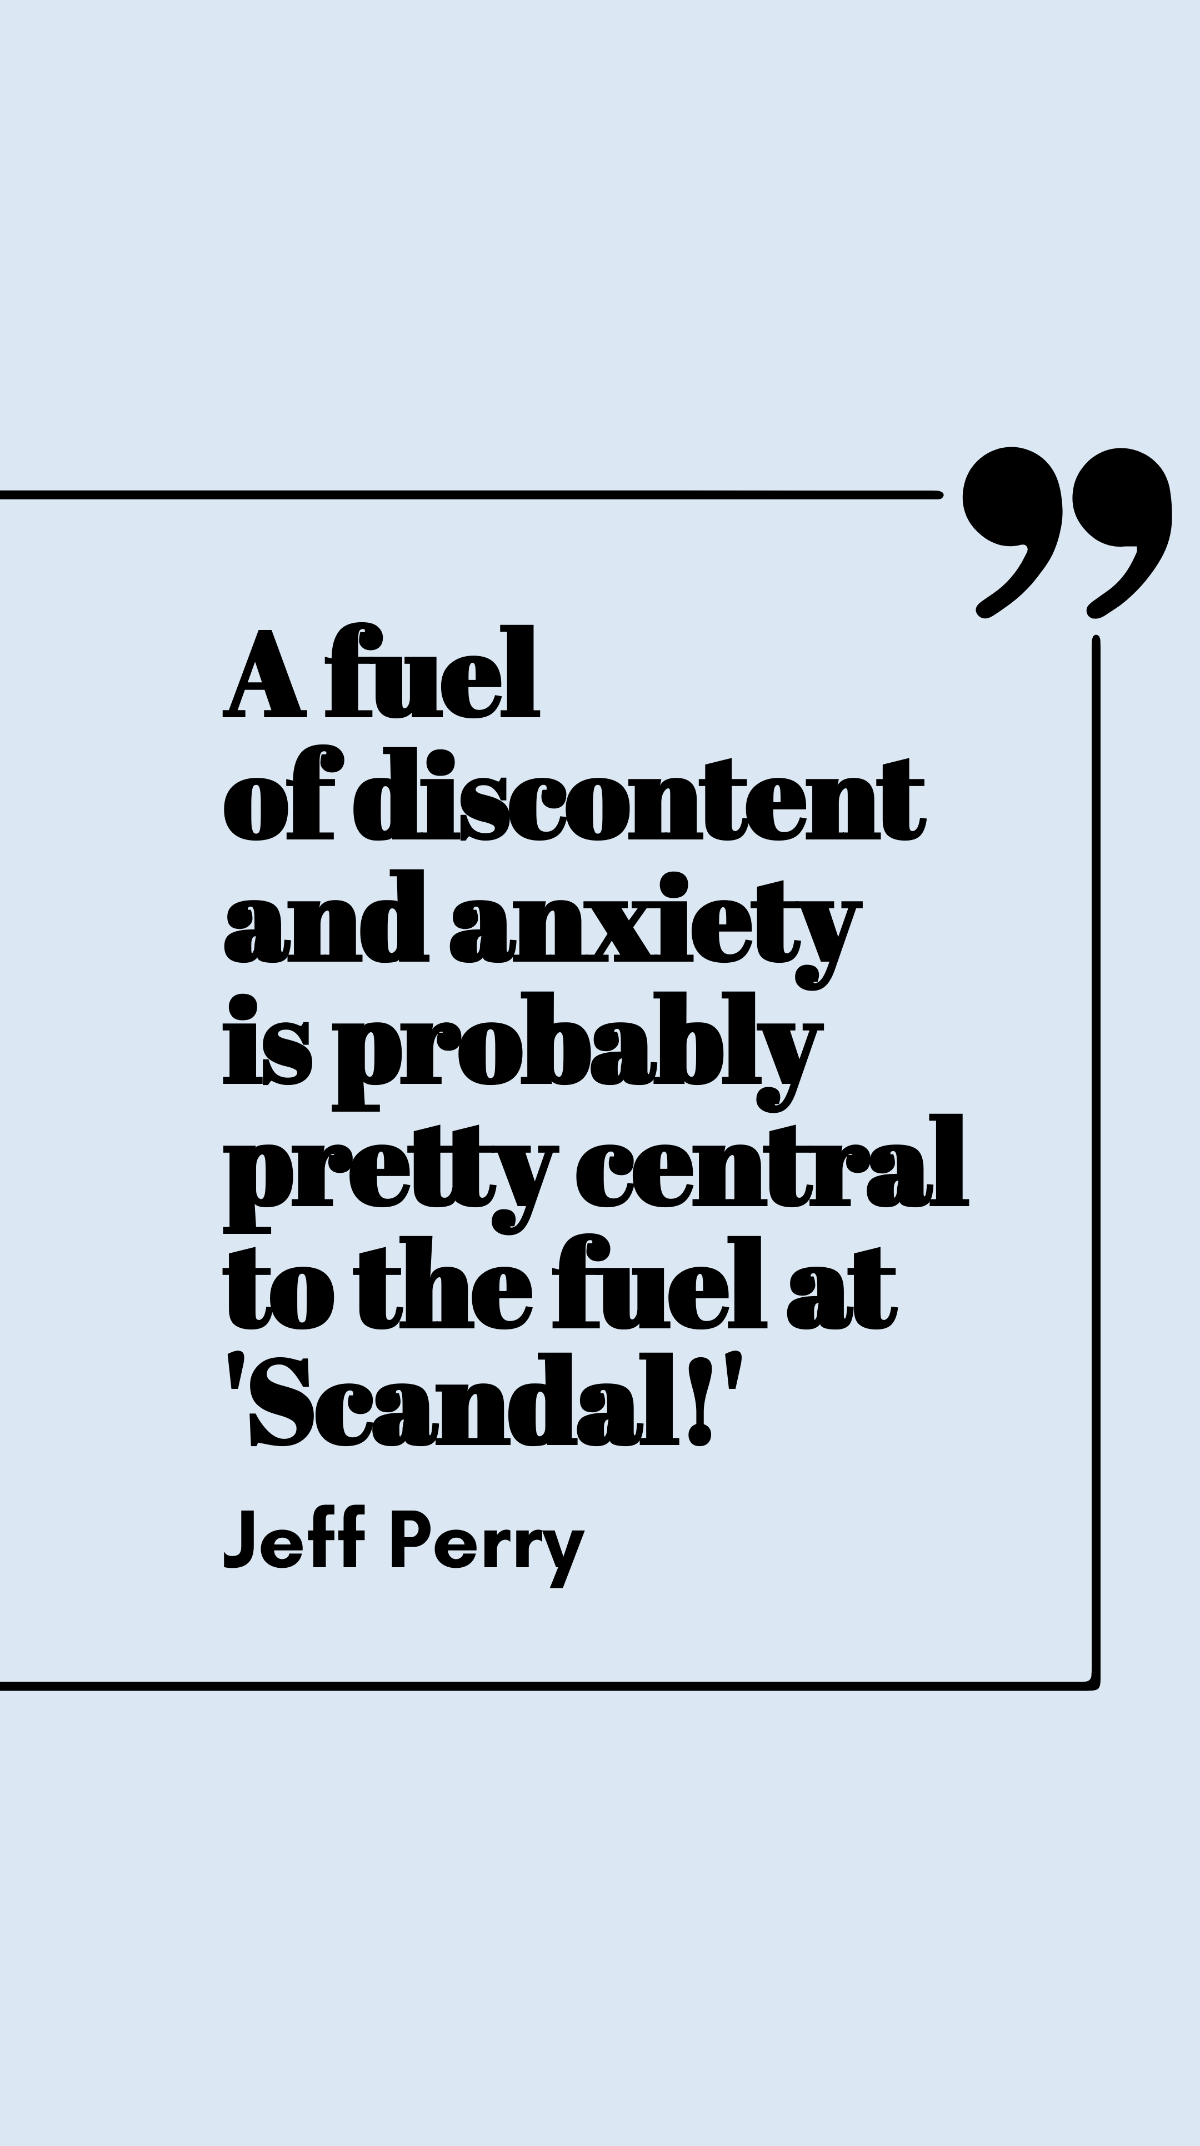 Jeff Perry - A fuel of discontent and anxiety is probably pretty central to the fuel at 'Scandal!'